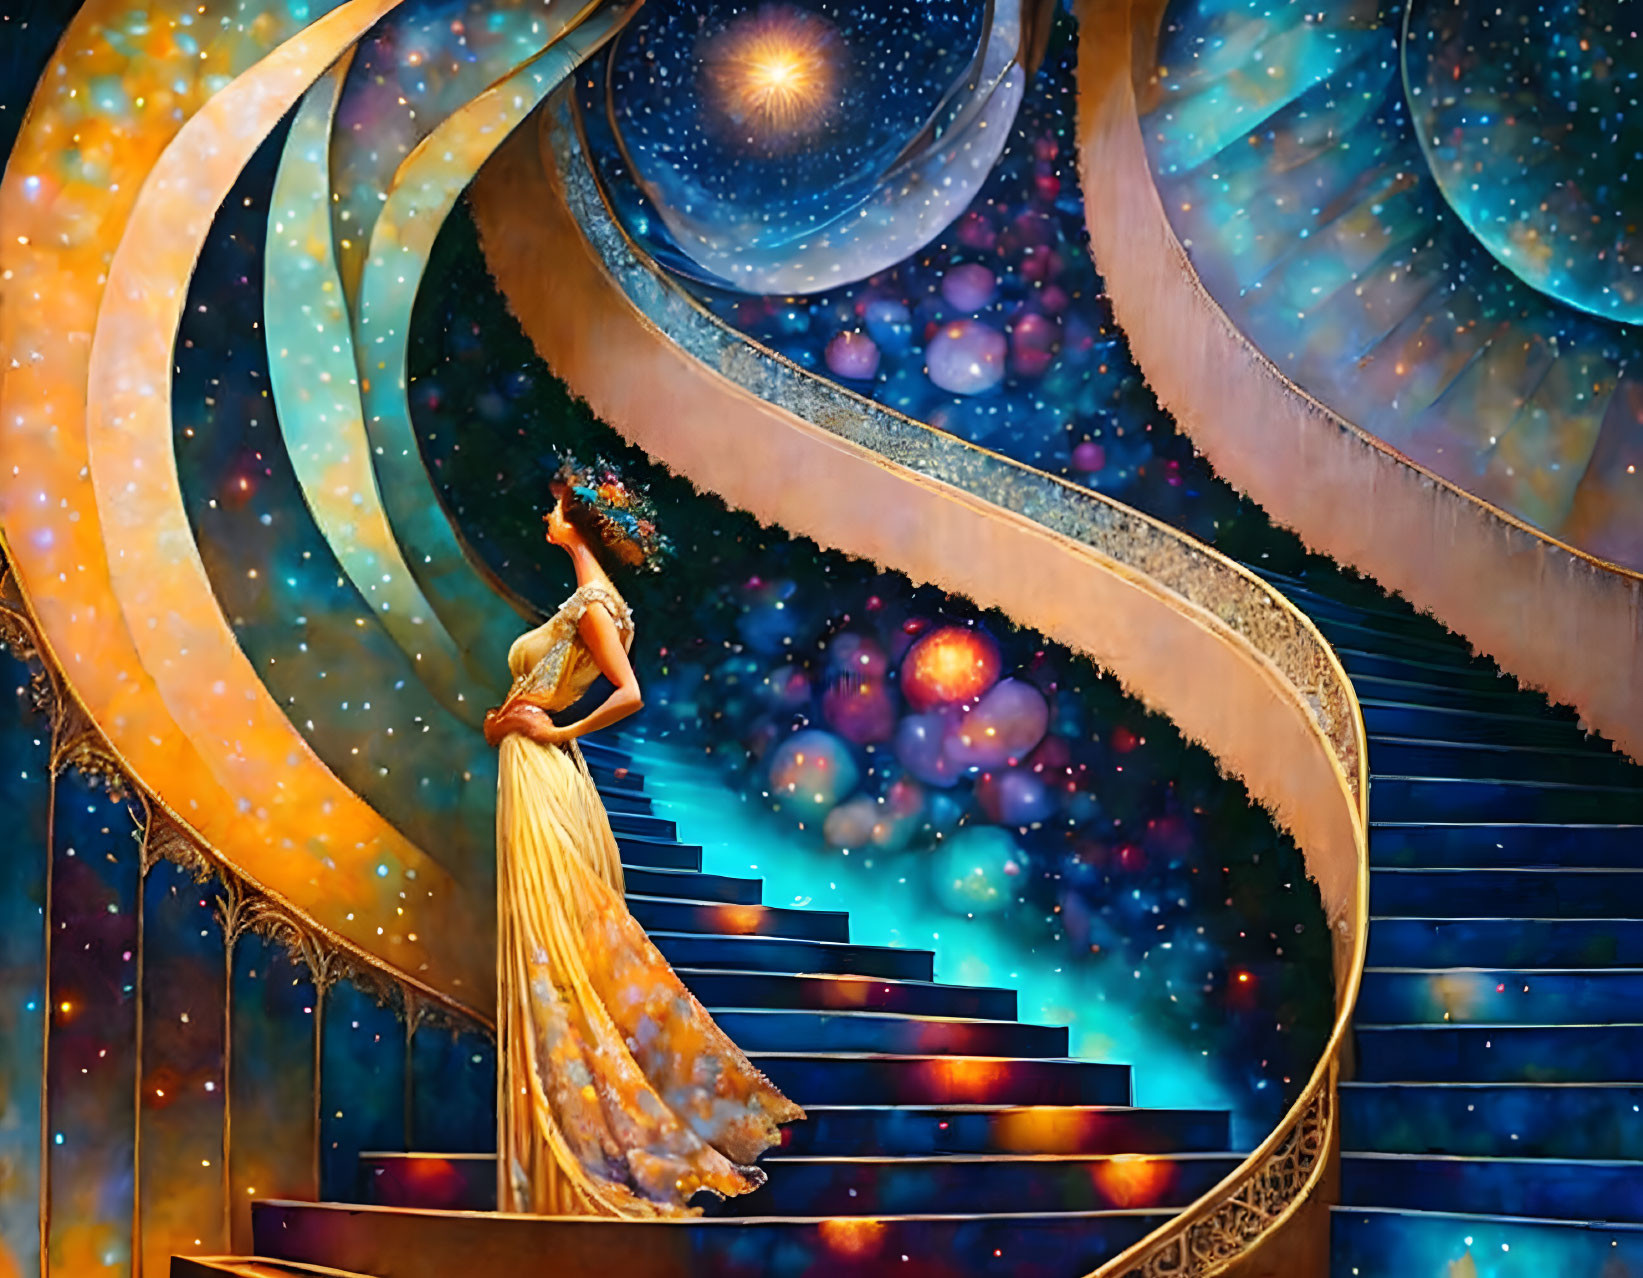 Woman in elegant gown climbs cosmic-themed staircase under star-filled sky